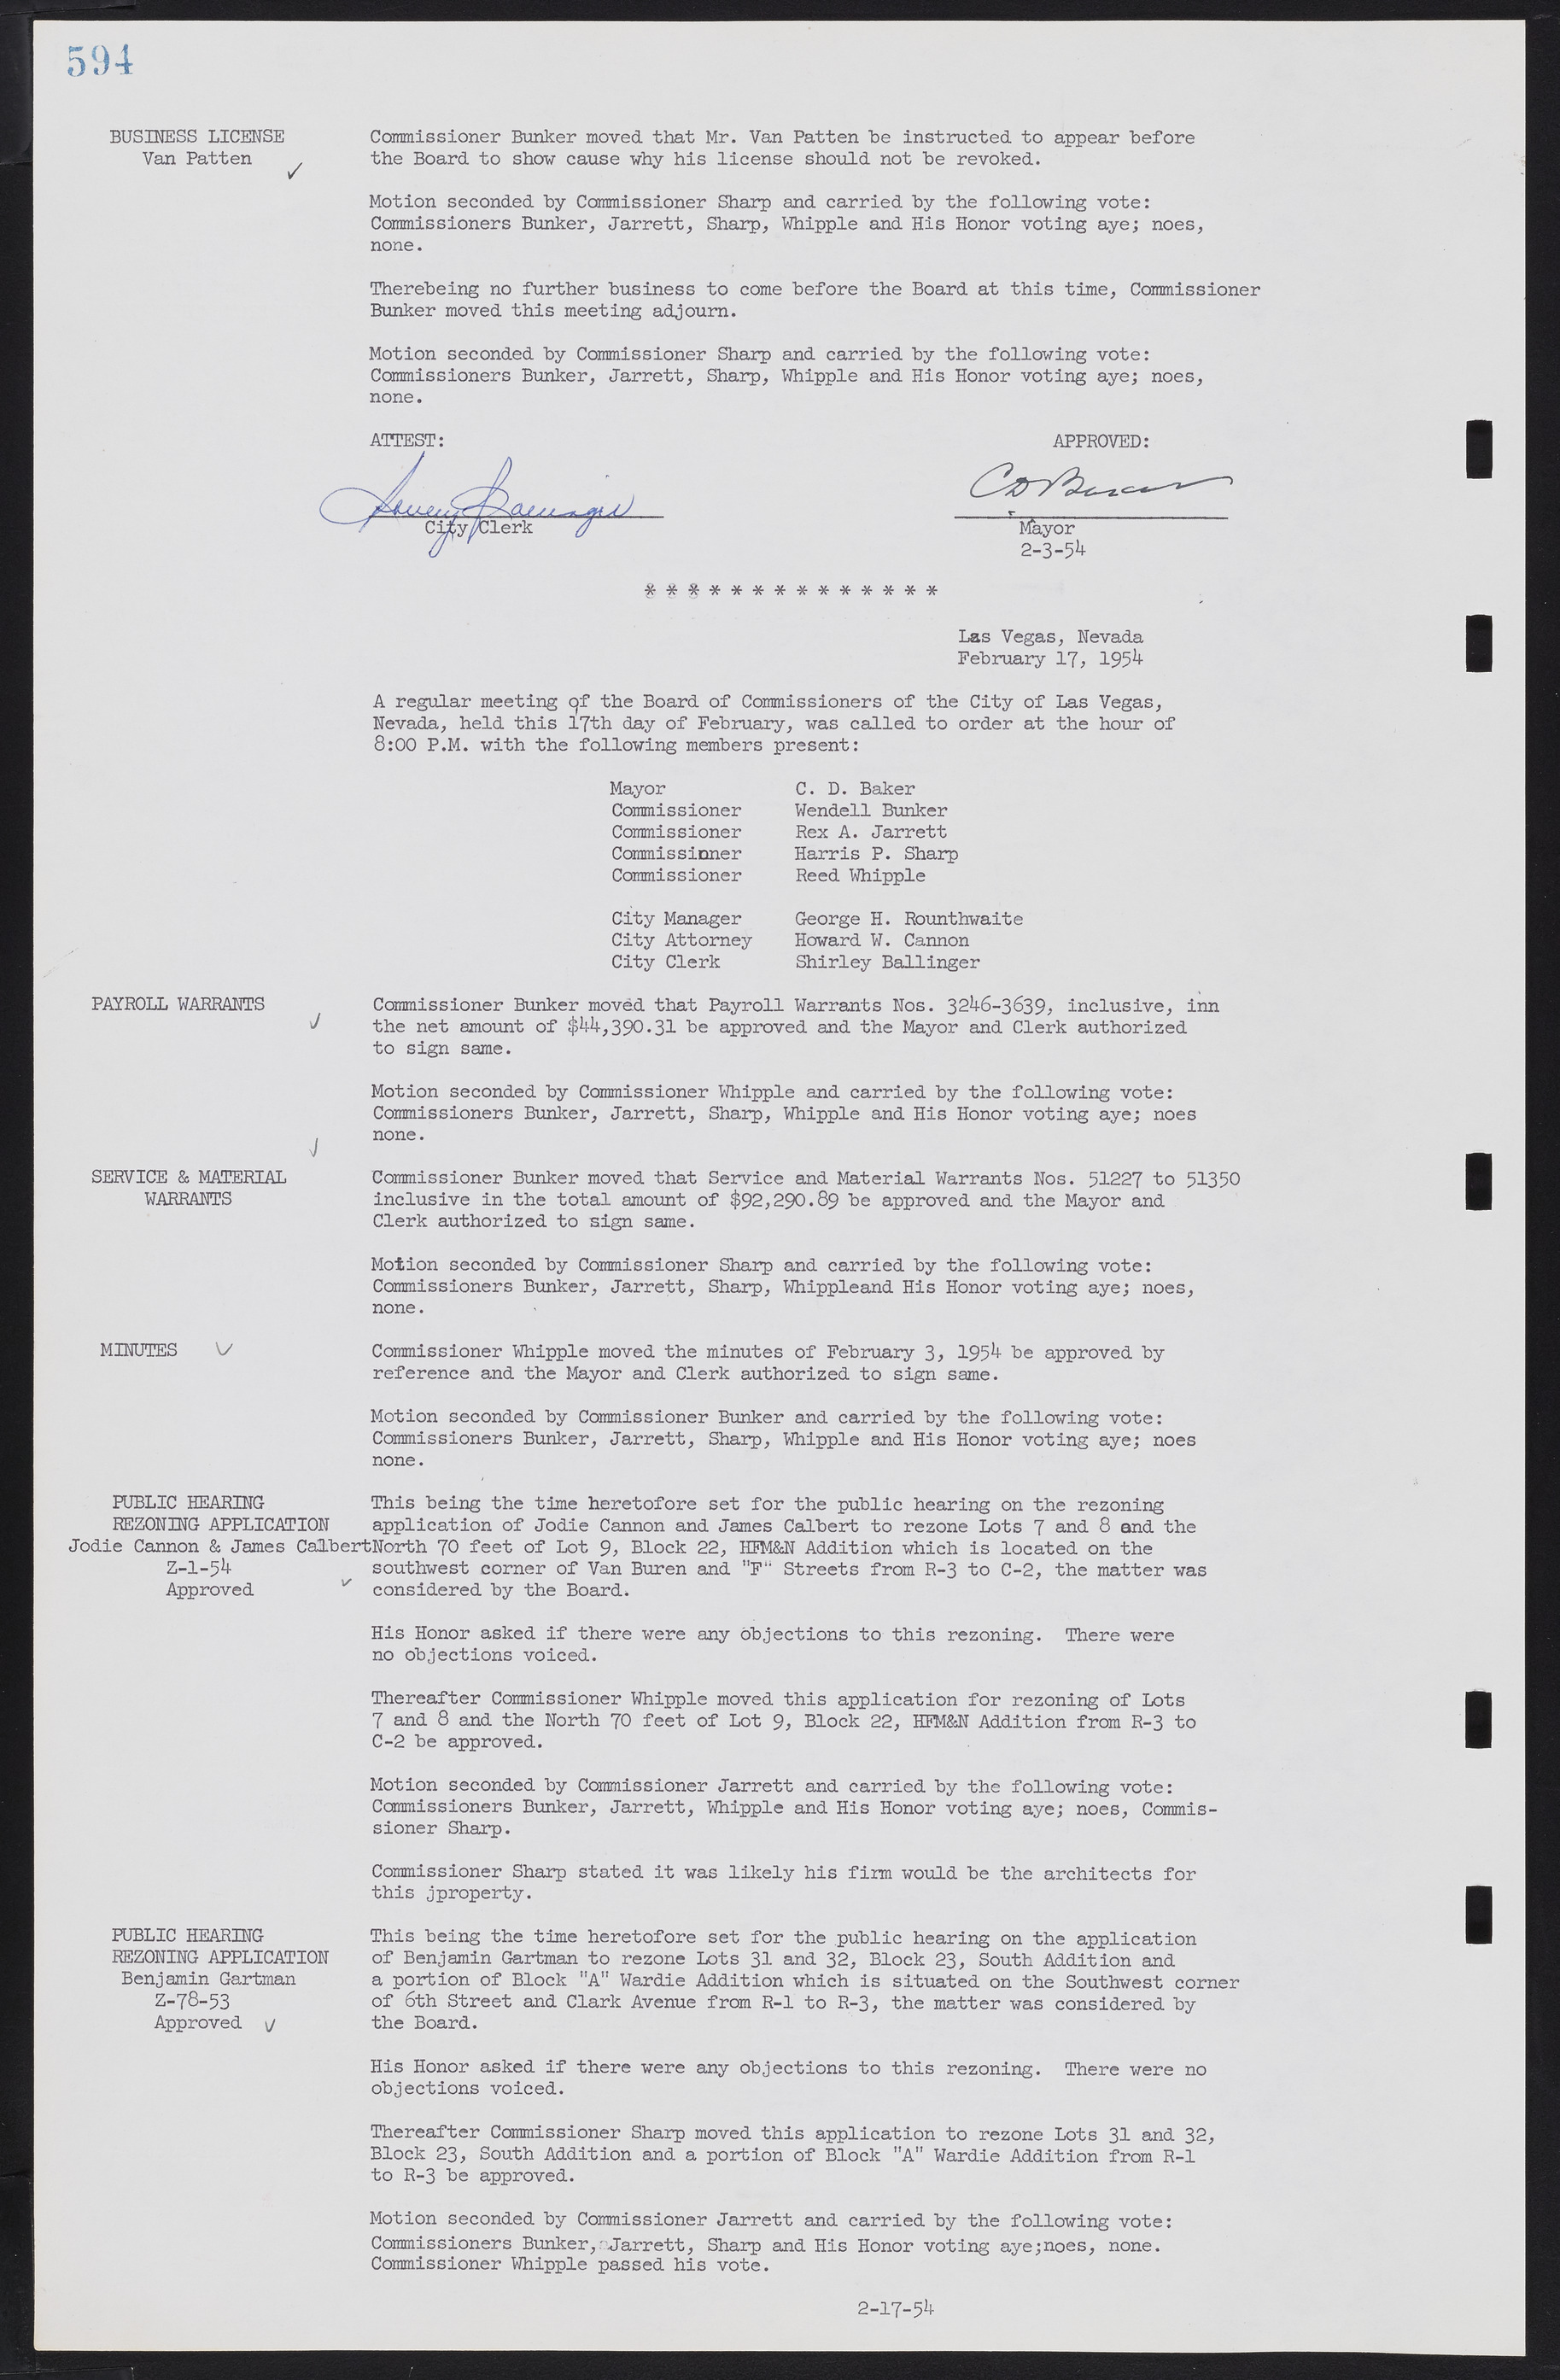 Las Vegas City Commission Minutes, May 26, 1952 to February 17, 1954, lvc000008-624